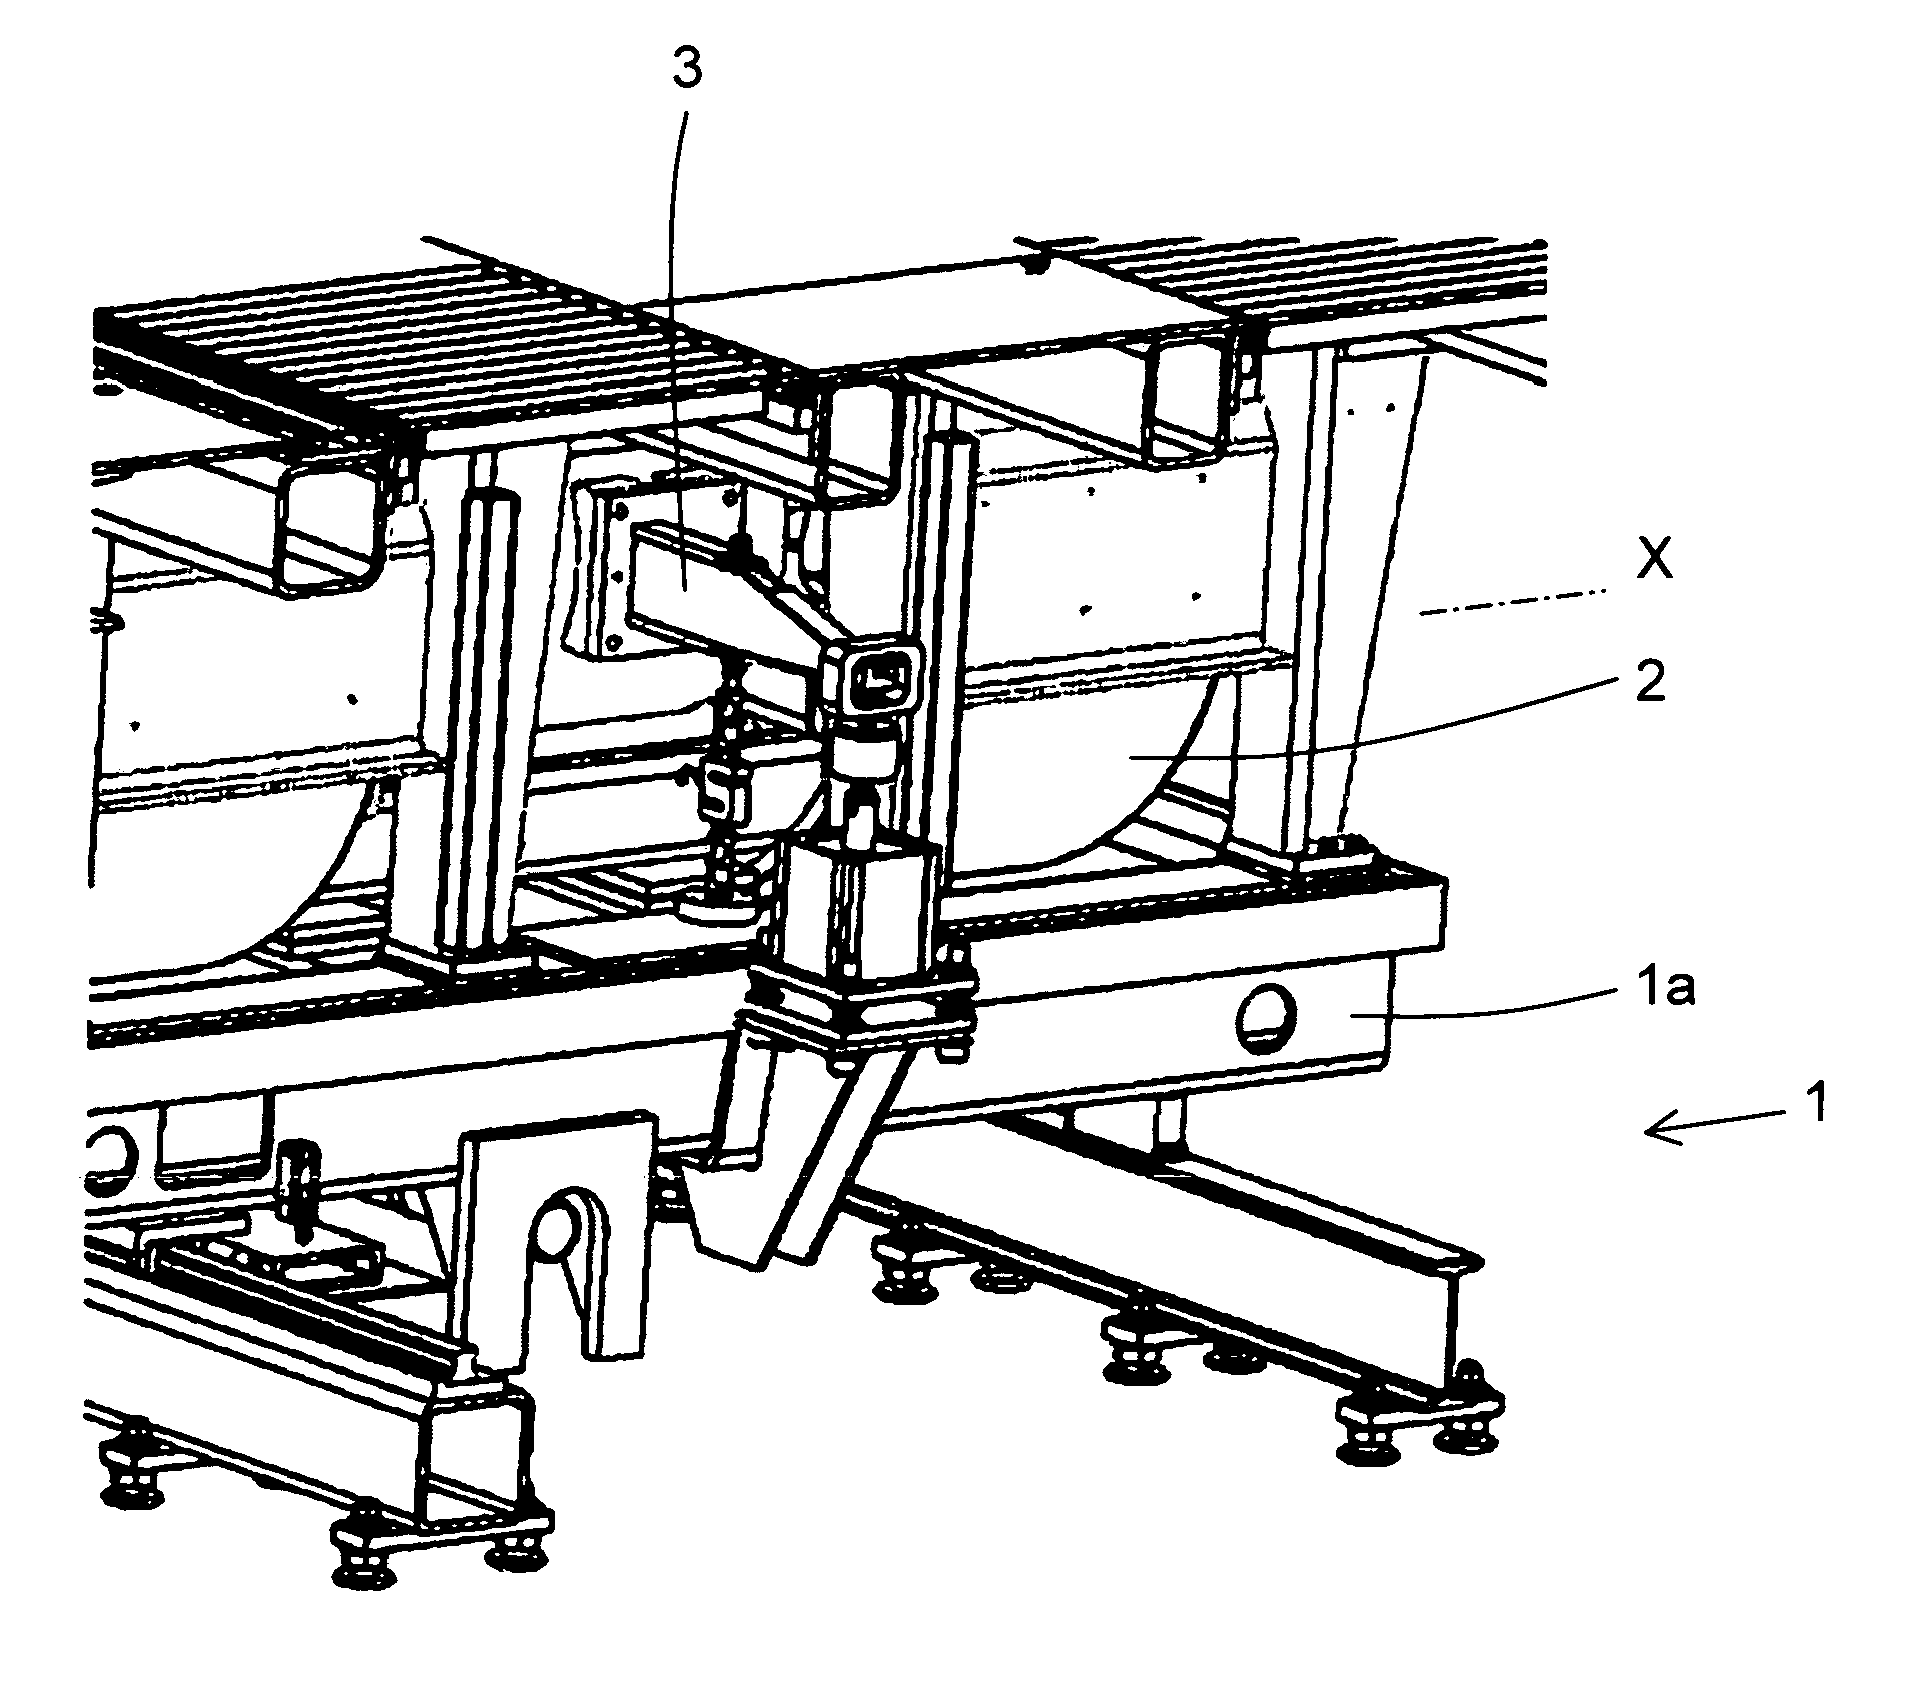 Test Stand with an Apparatus for Calibrating a Force-Measuring Device